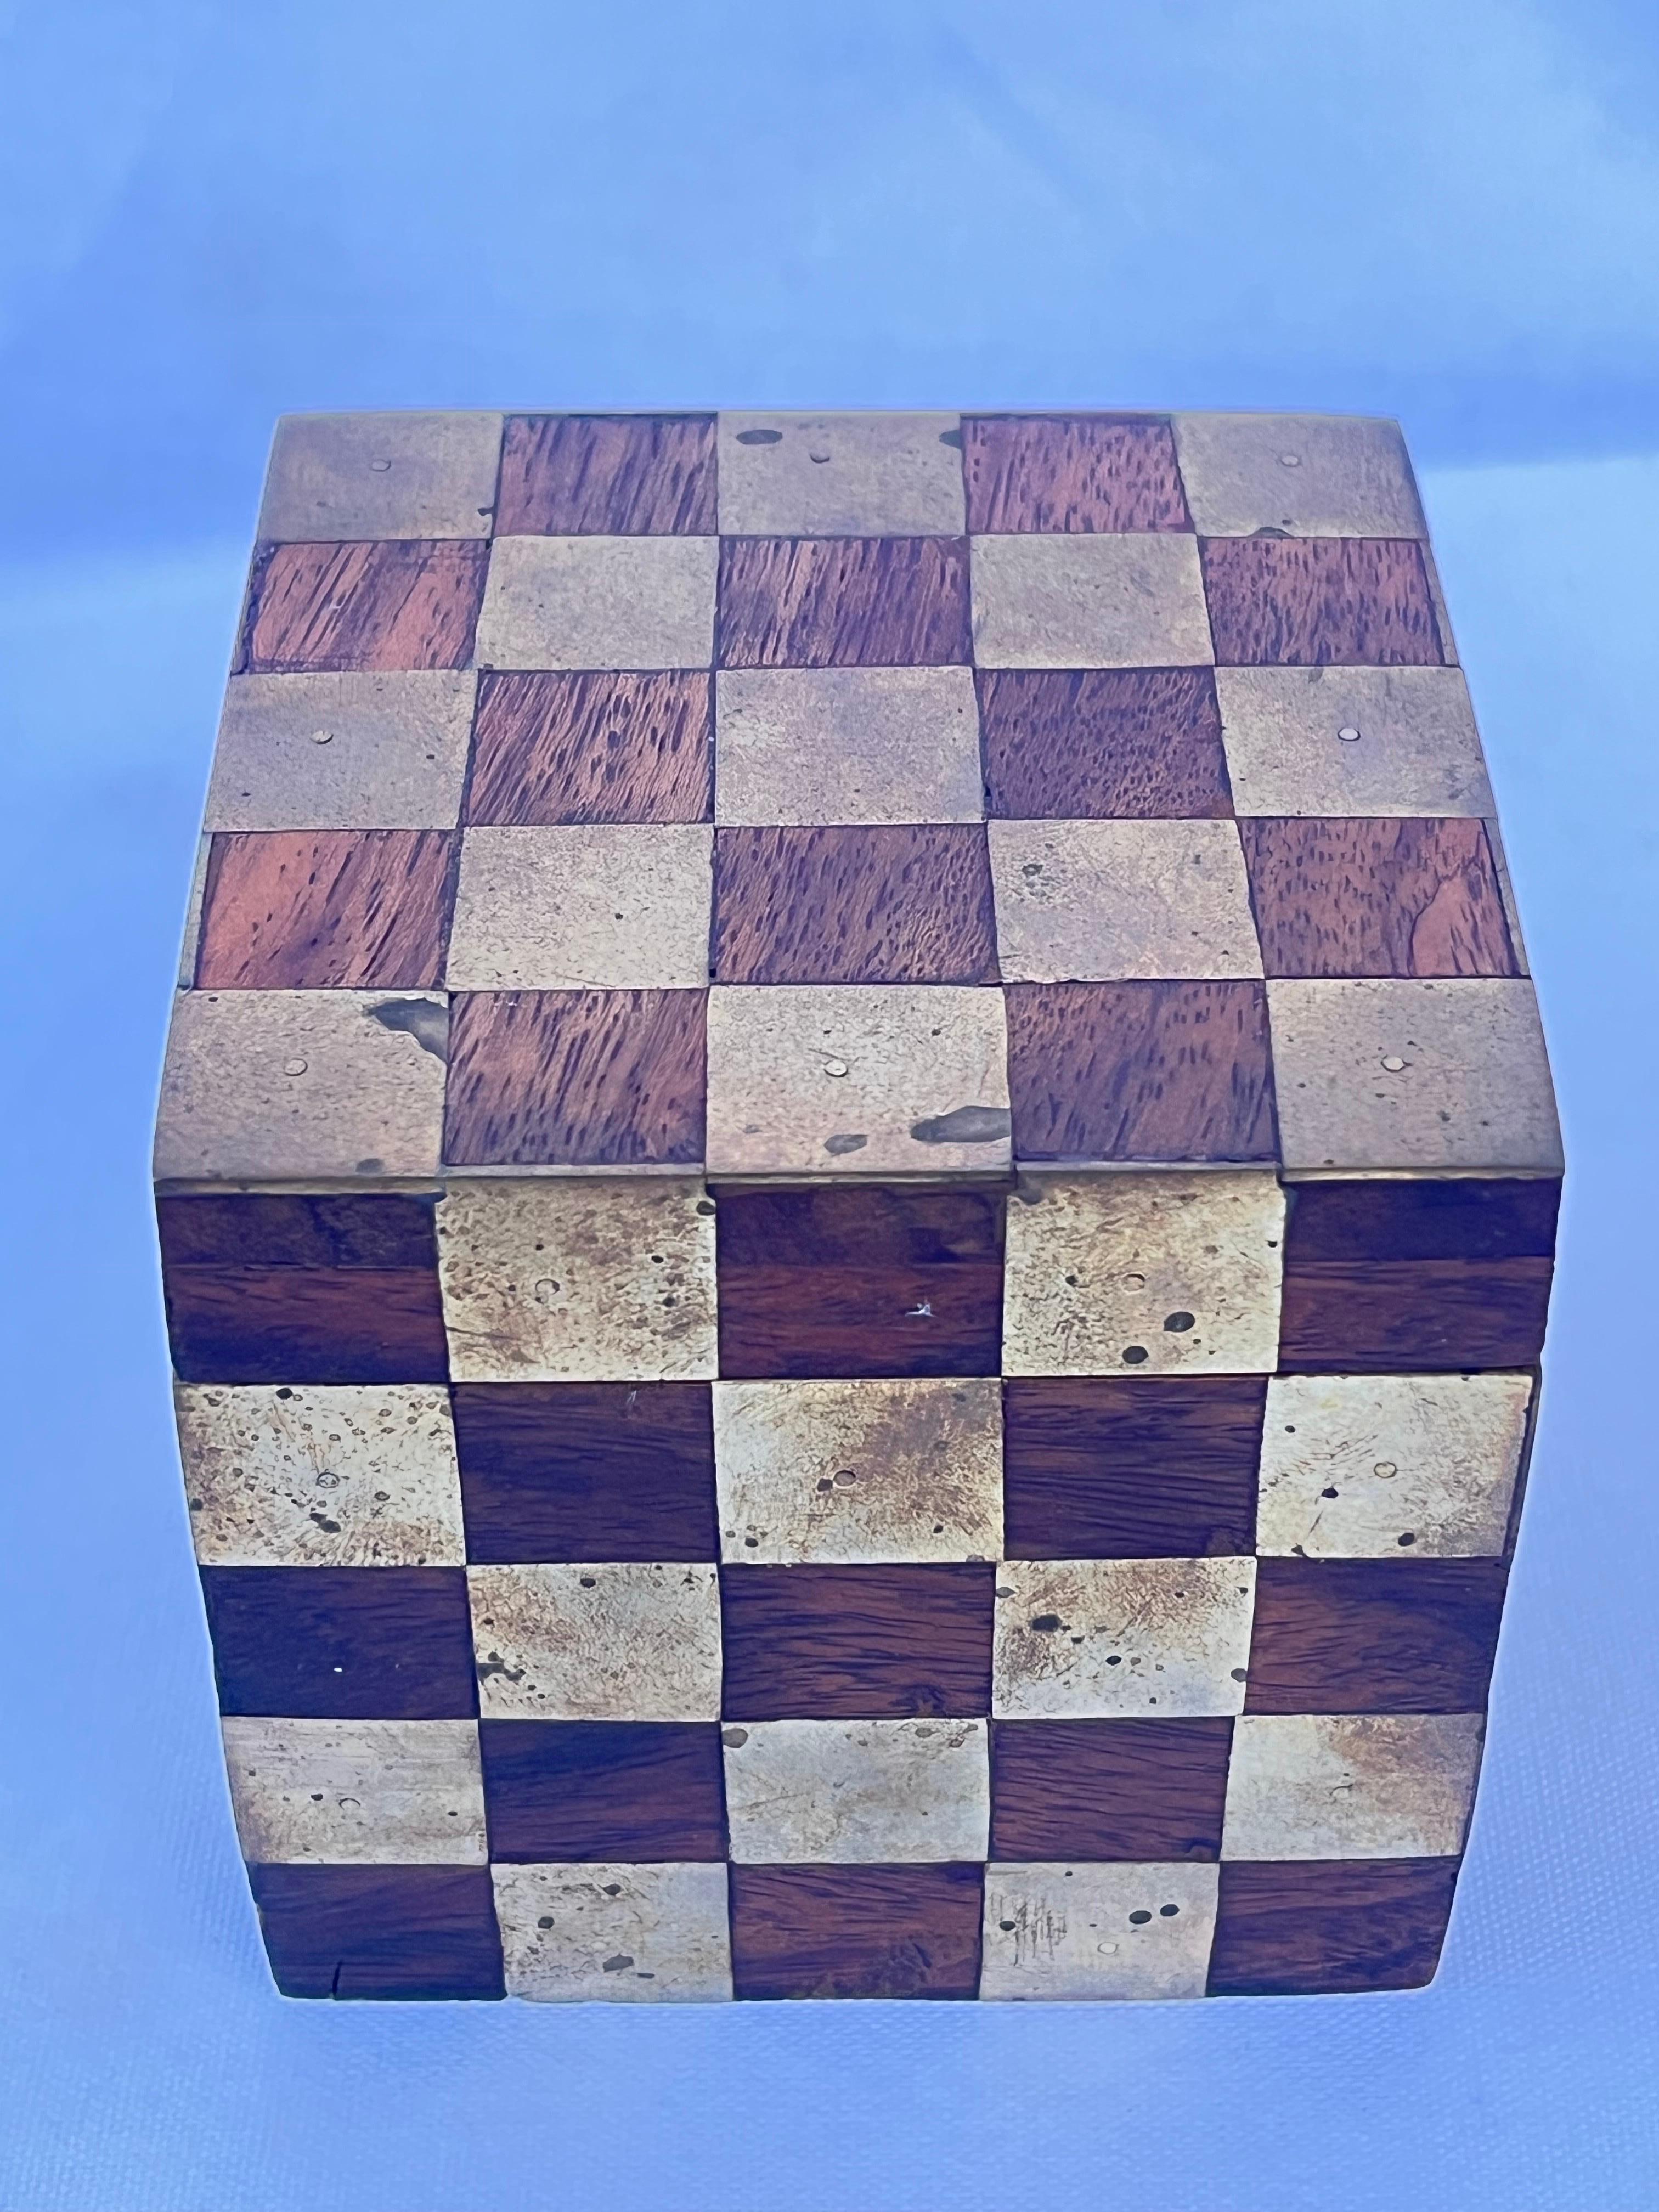 A fantastically geometric checkerboard style lidded cube shaped box or paperweight or desk accessory presented in alternating cubes of brass and wood. It's the perfect hiding spot or stash box for those things you want to keep all to yourself but